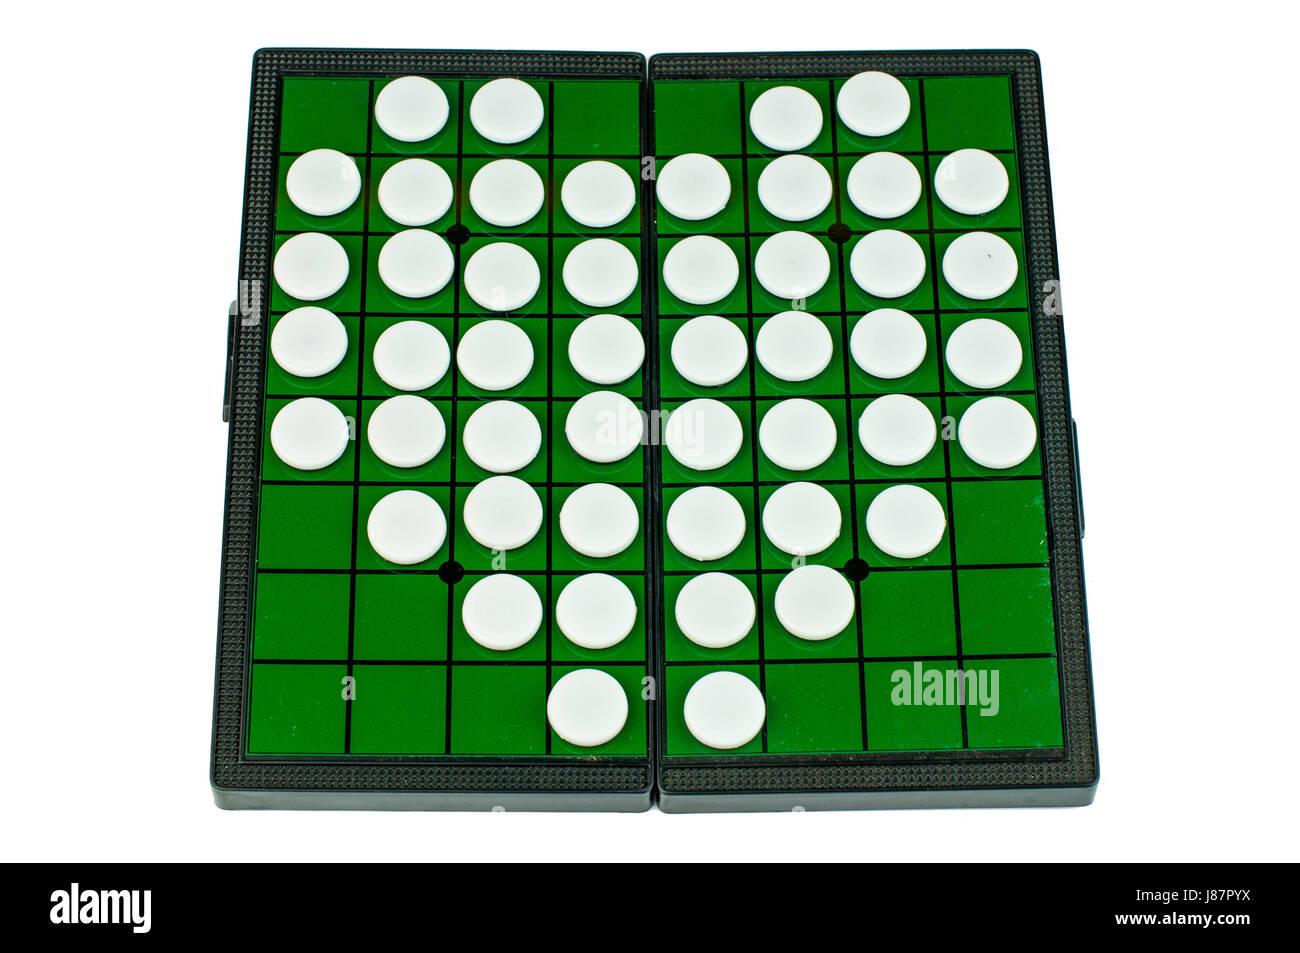 White Heart Shaped Othellos on Green Grid Othello Board Isolated Stock Photo